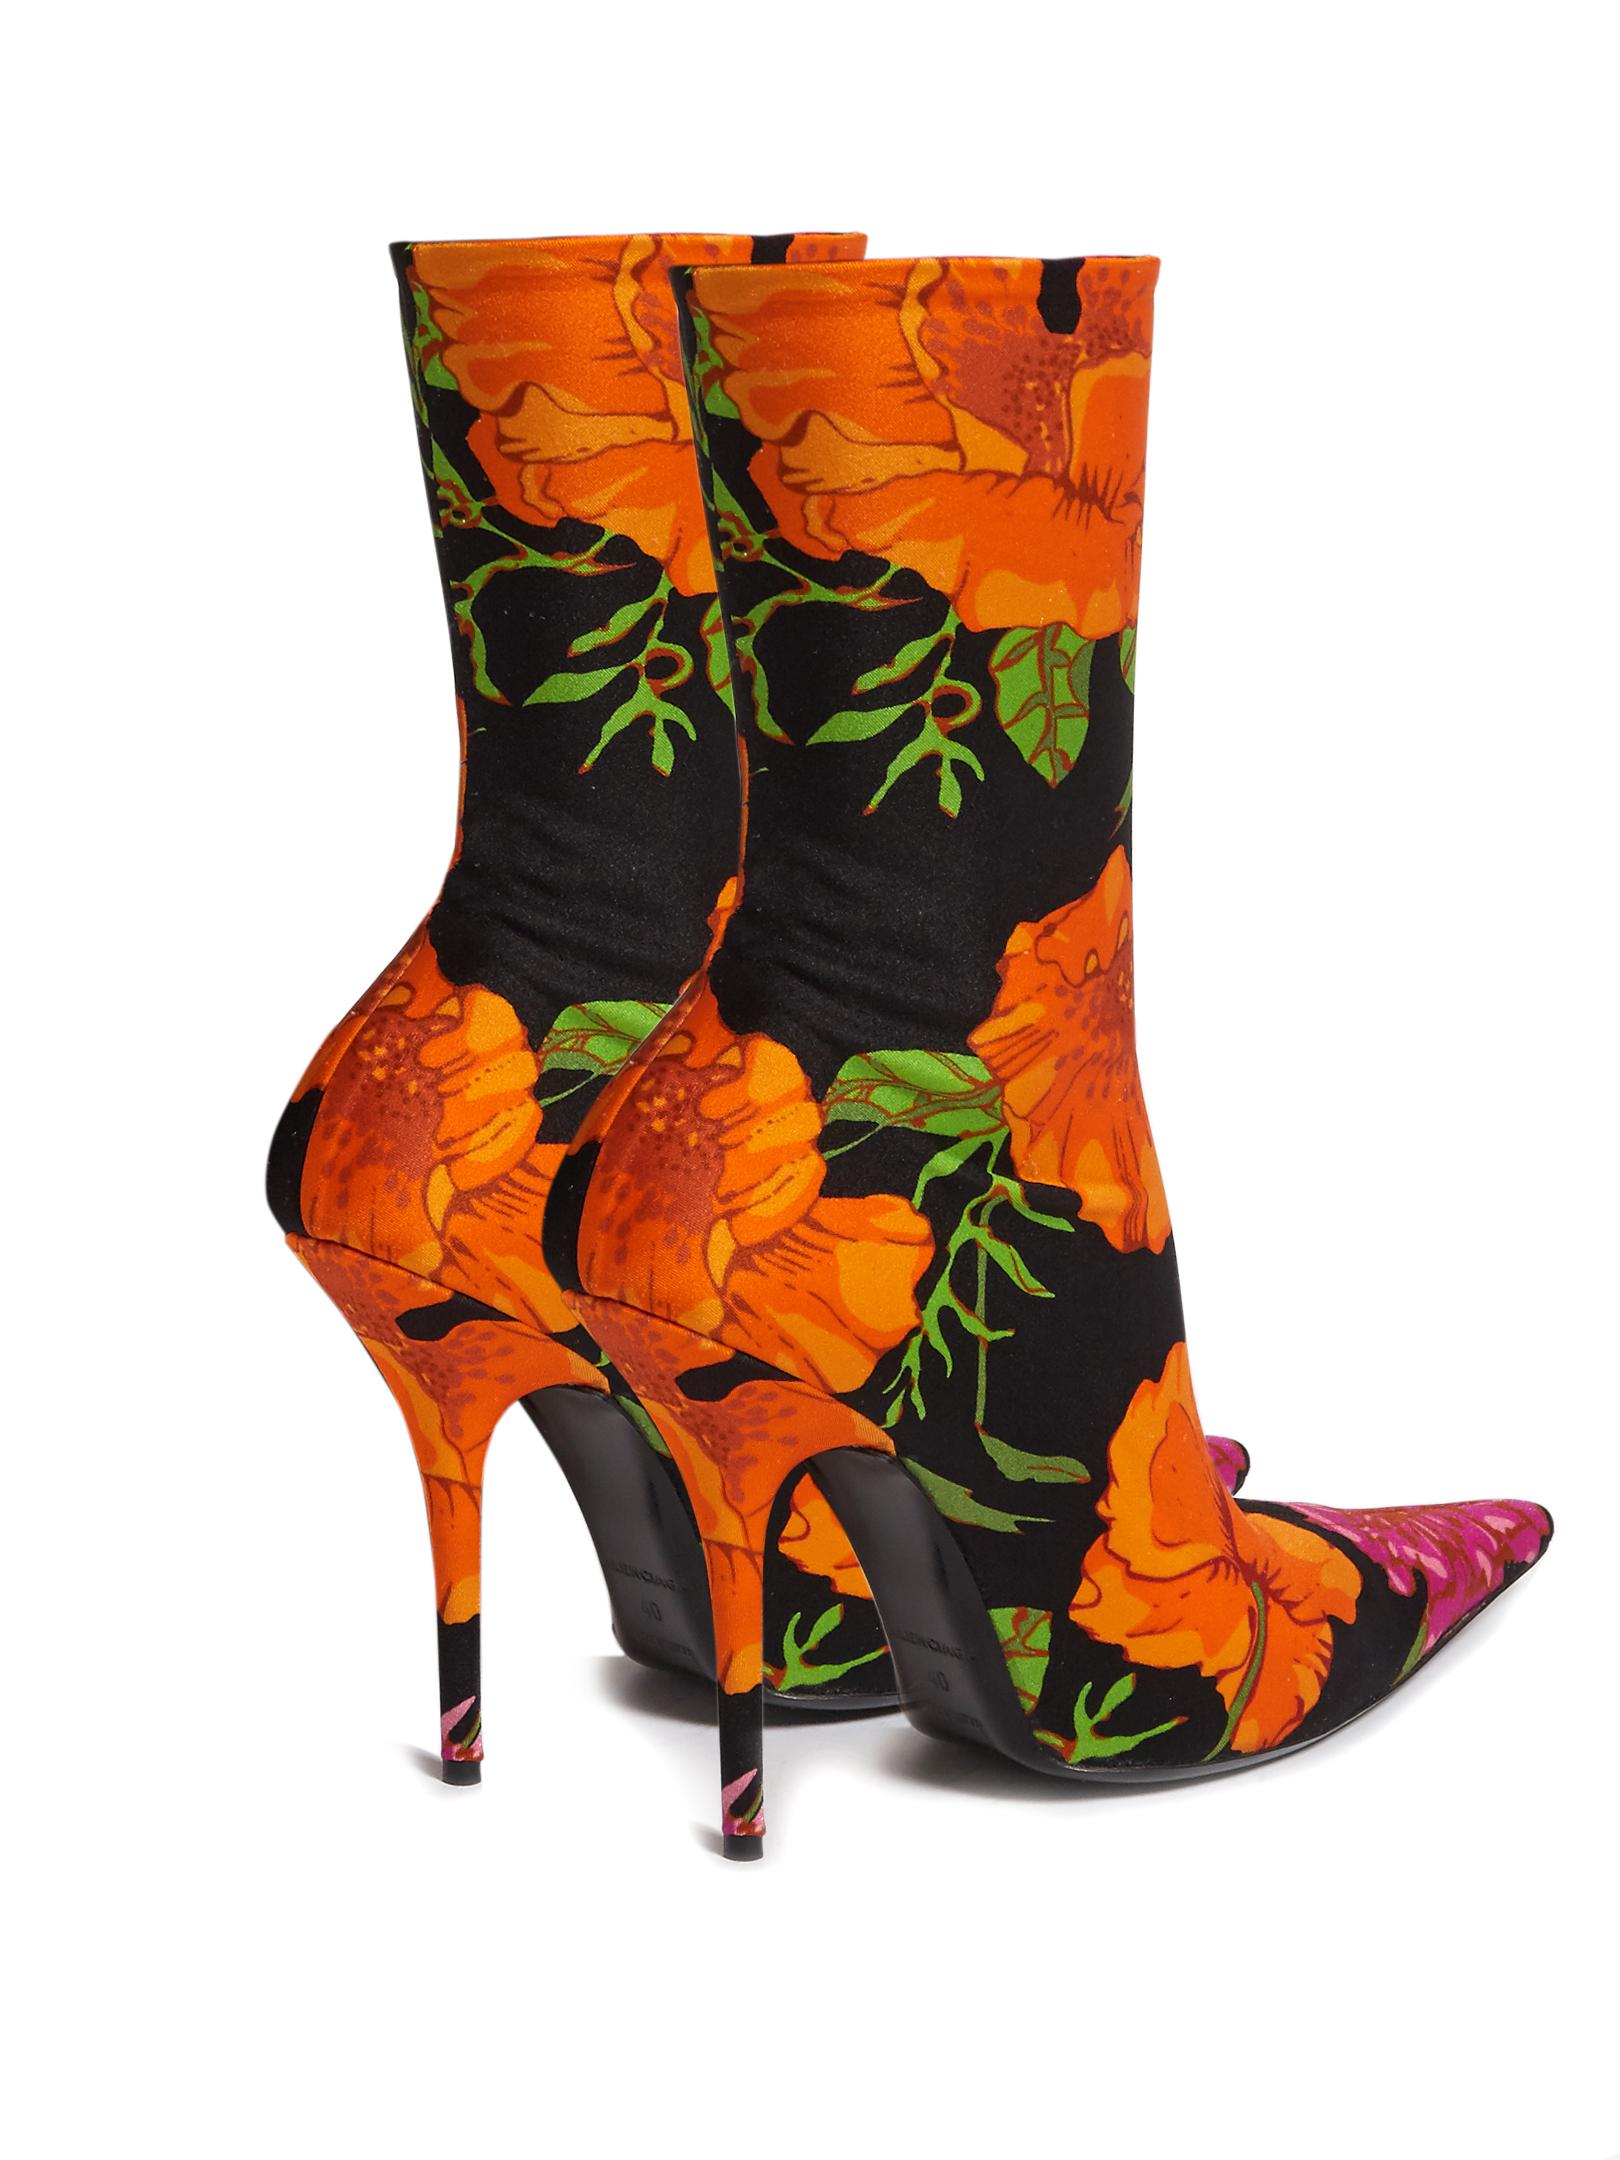 Balenciaga Knife Point-toe Floral-print Ankle Boots in Black - Lyst